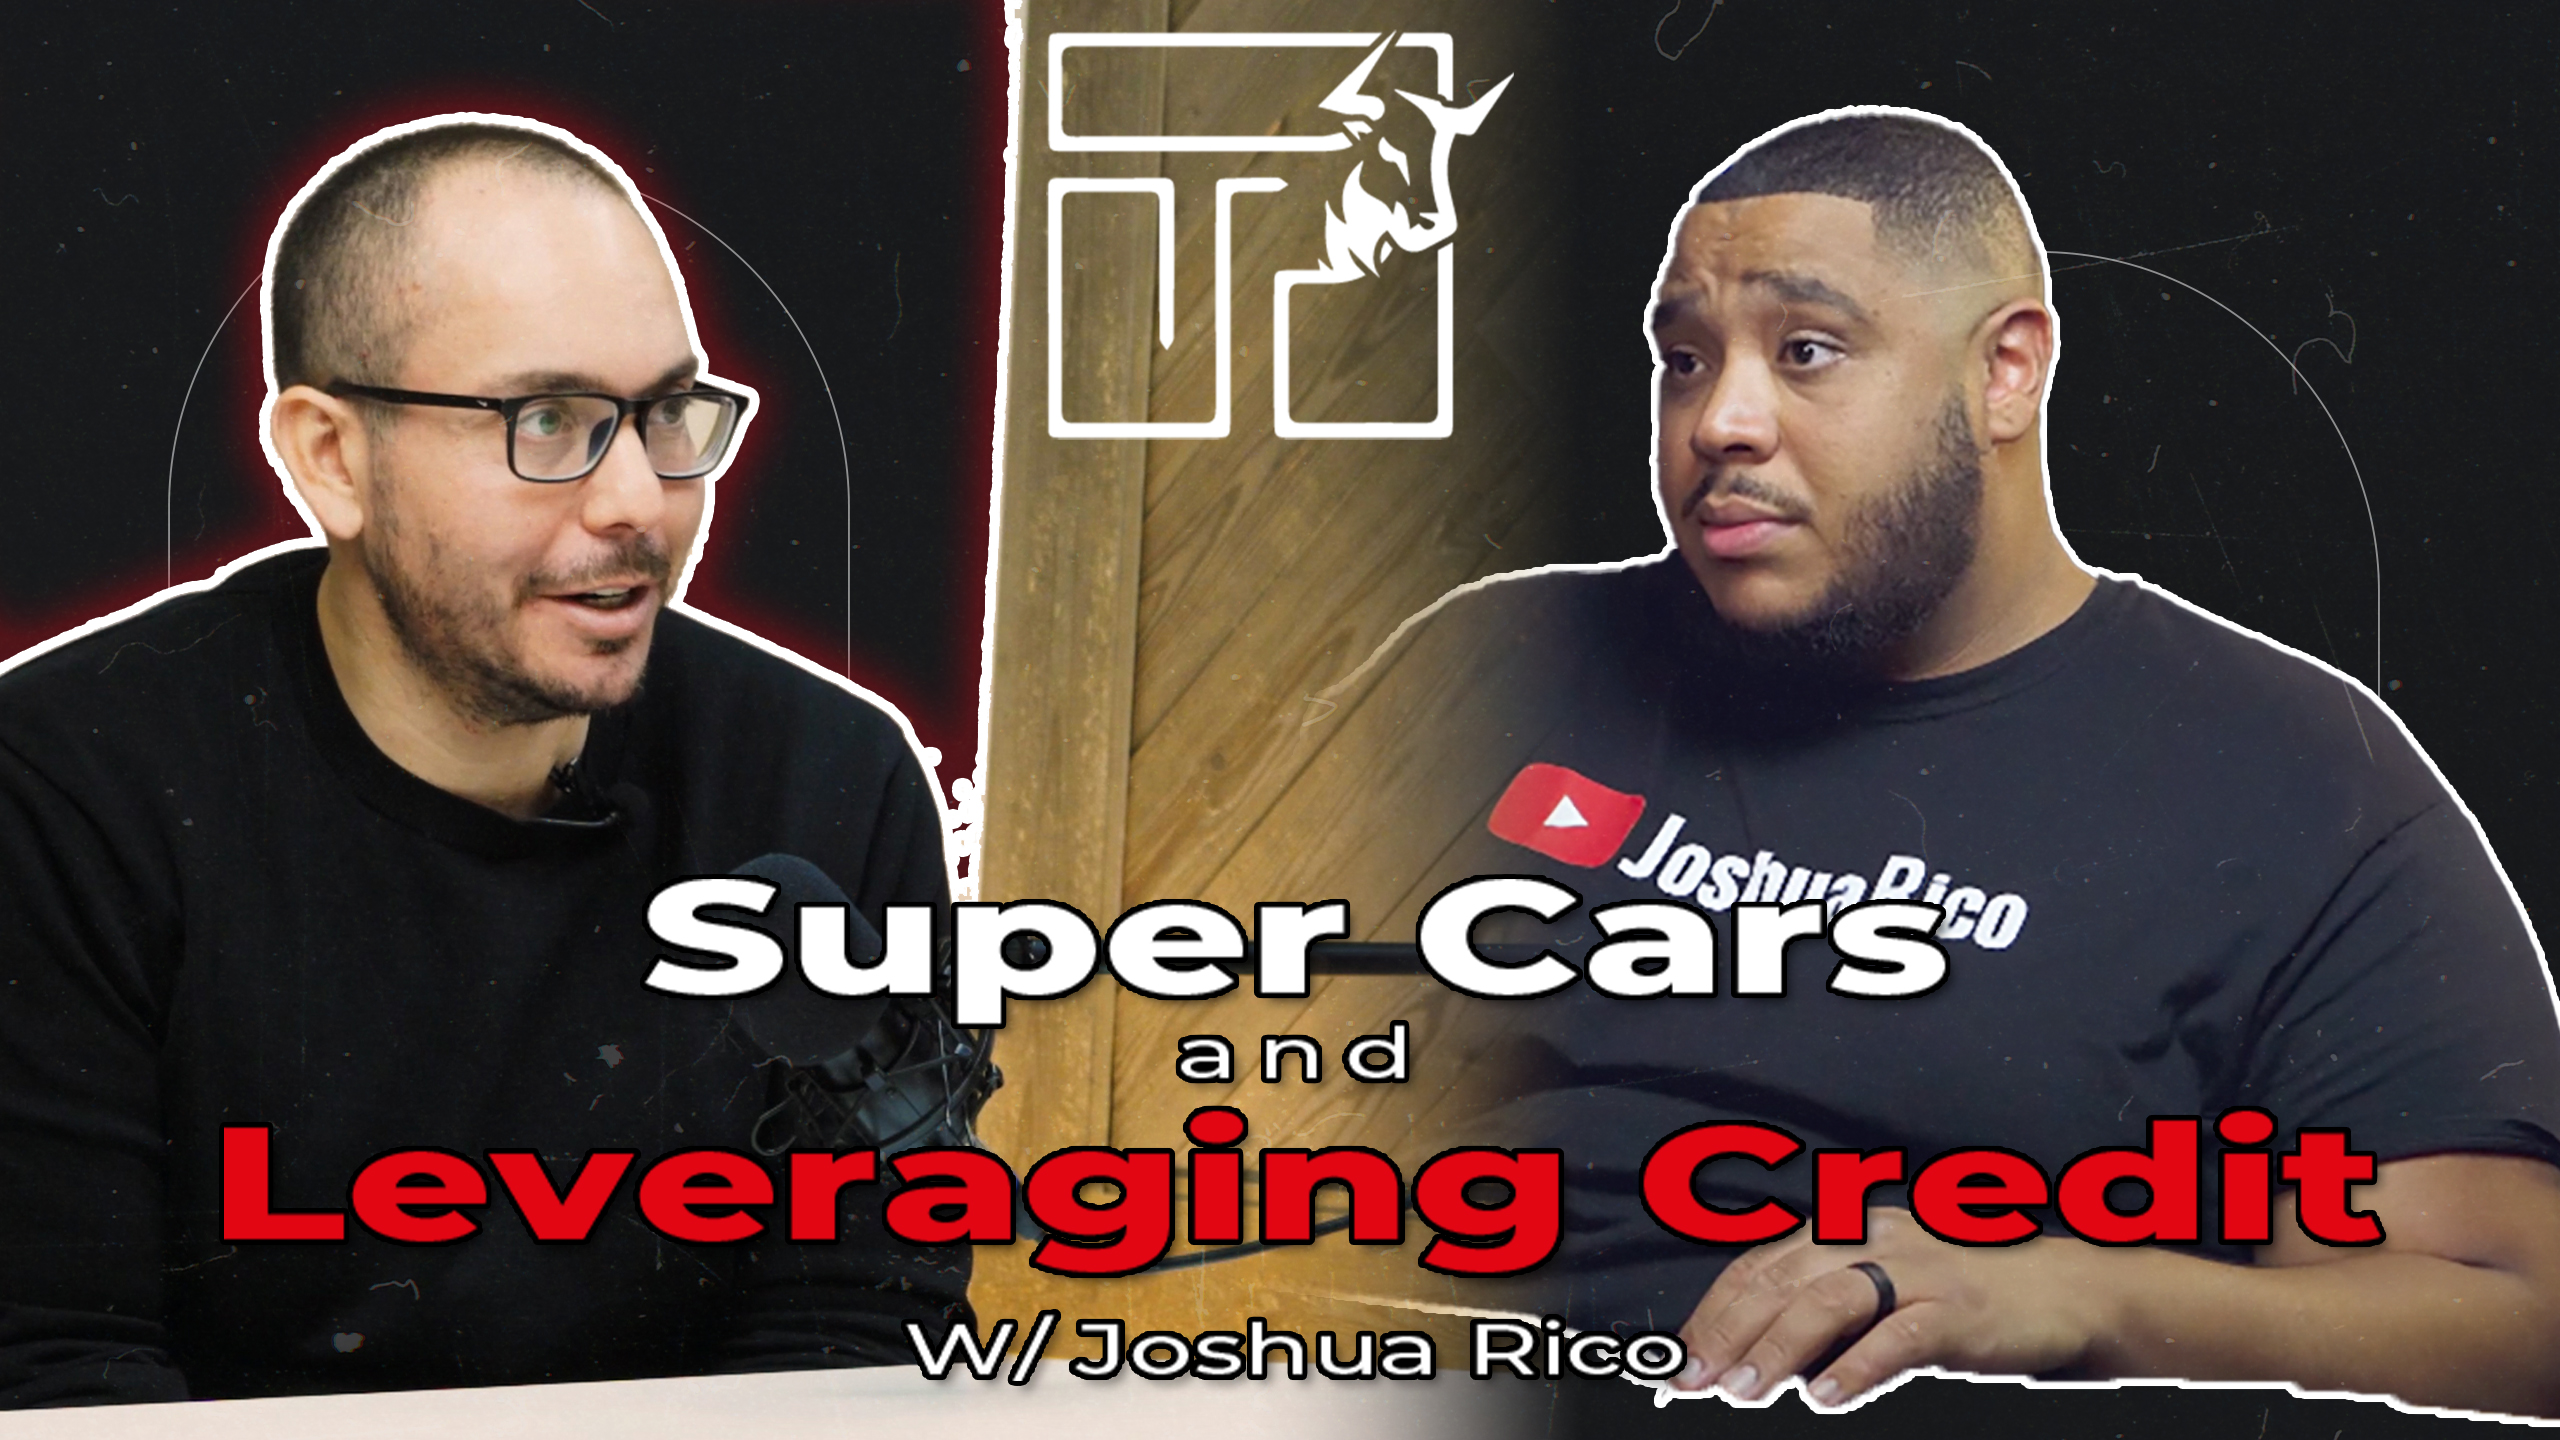 Joshua Rico has built his credit repair empire by being the top dog in his field. From helping others build up their credit to helping you get your dream car by leveraging credit, Joshua's success speaks for itself. Joshua and Tony speak on what the American school system has failed to teach, the ins and outs of you can get credit to work in YOUR favor.